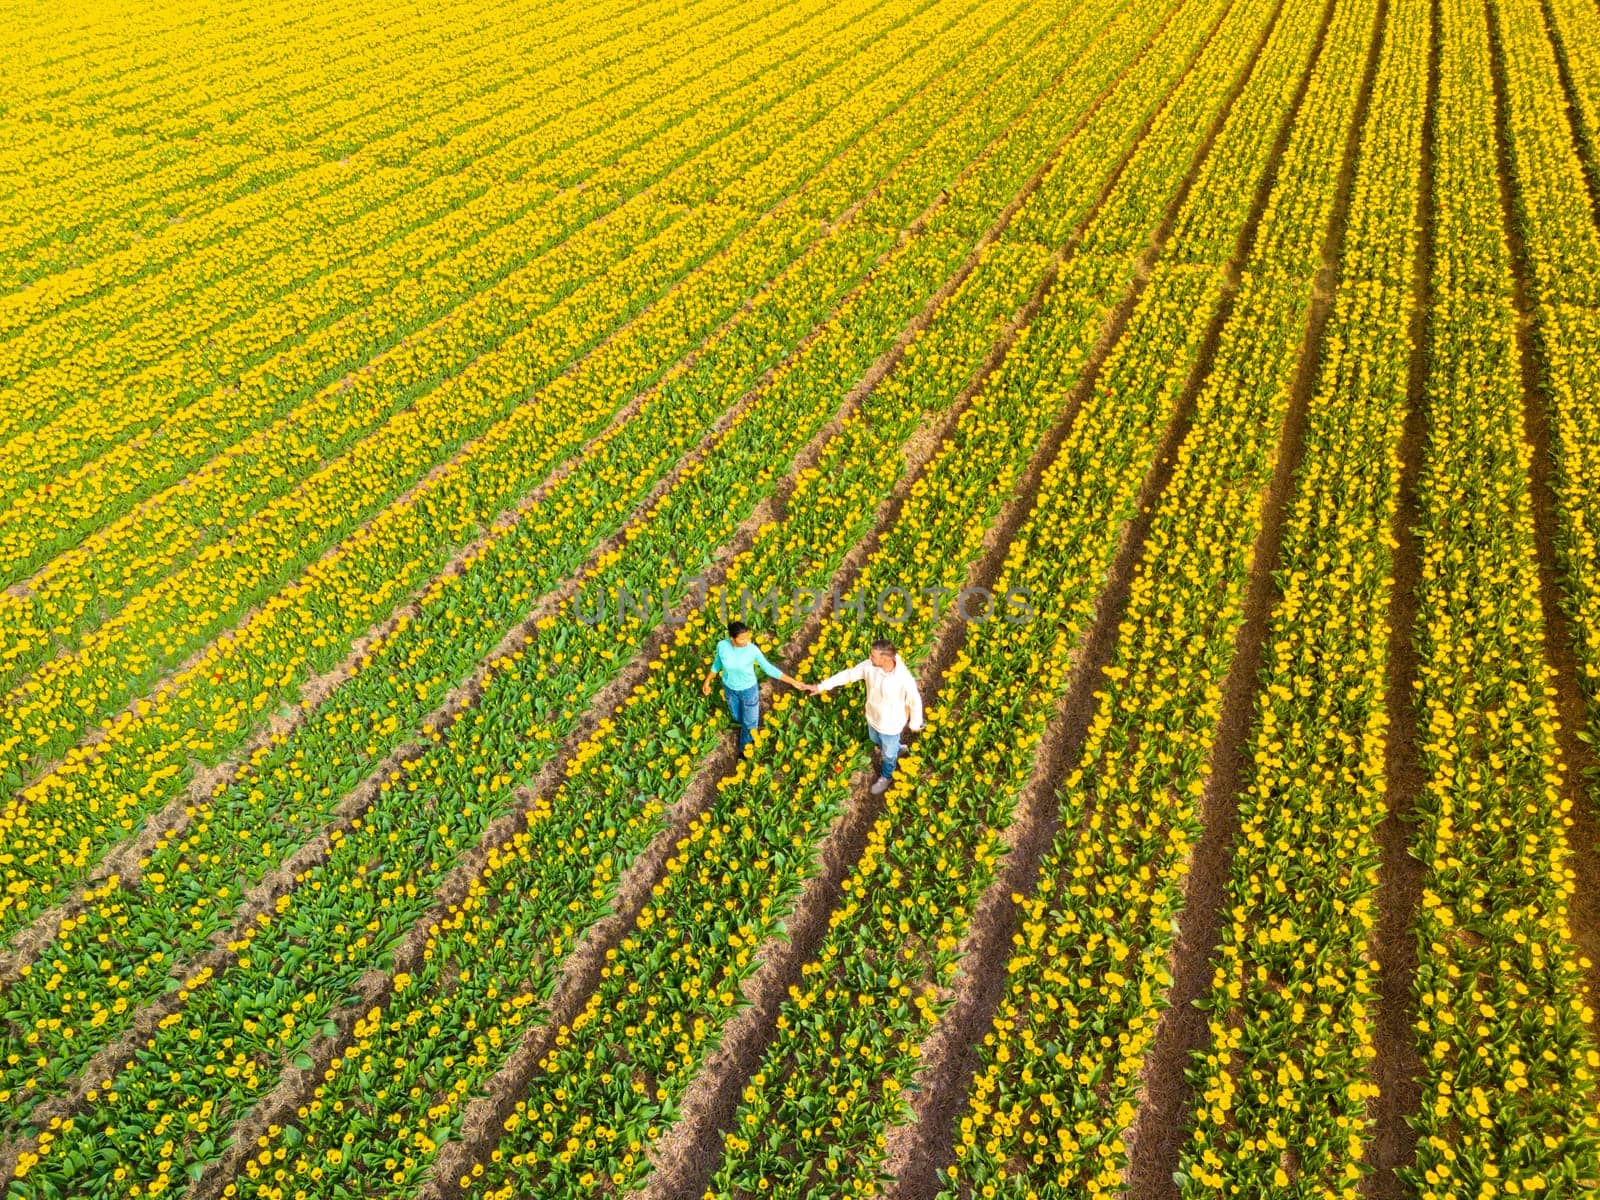 Men and women in flower fields seen from above with a drone in the Netherlands, Tulip fields Spring by fokkebok